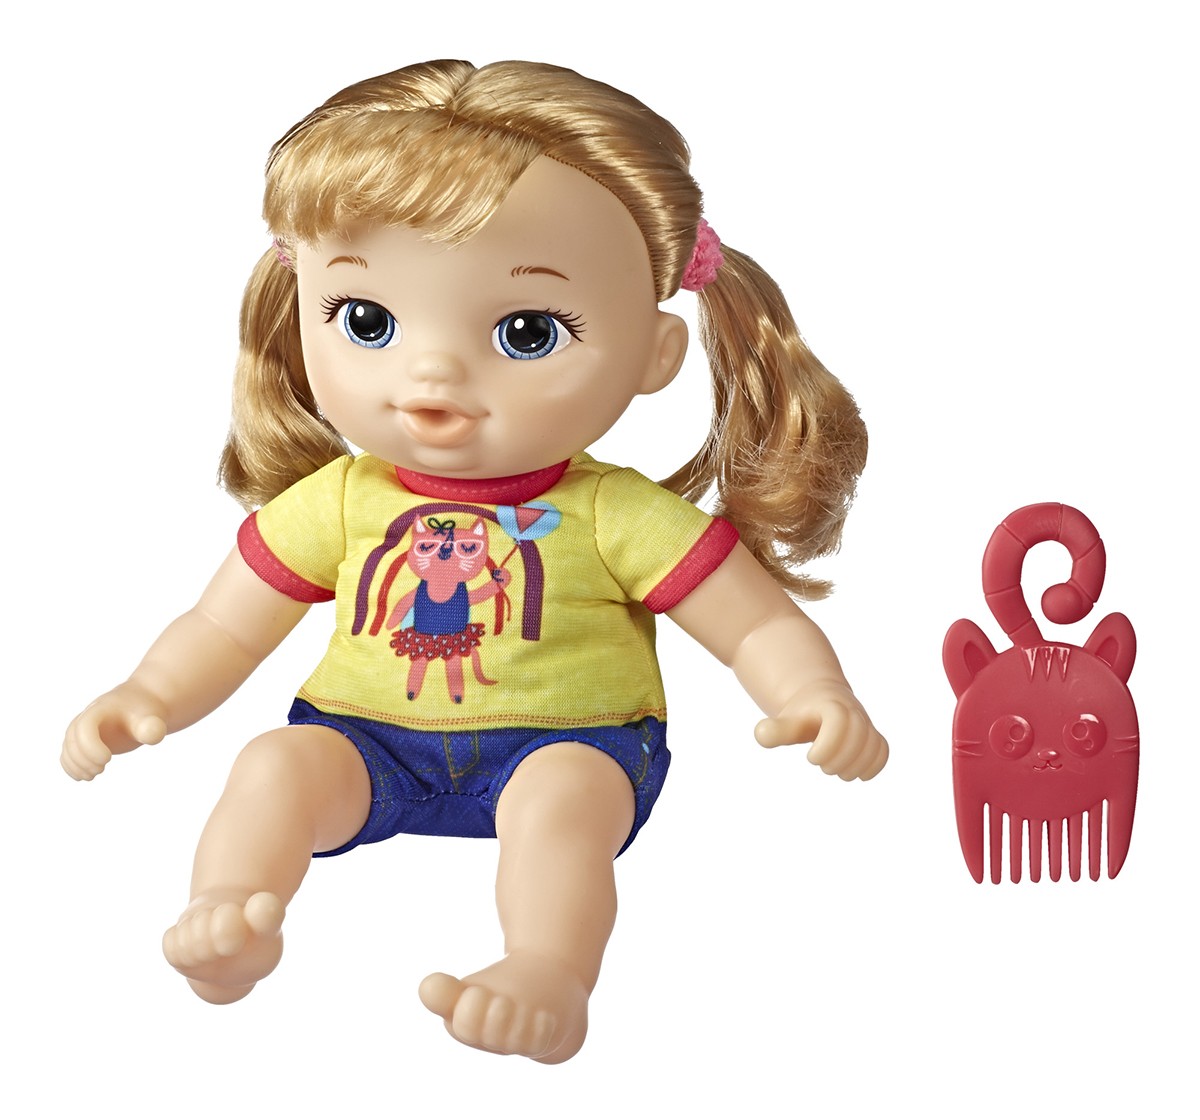 Littles by Baby Alive, Littles Squad, Little Astrid, Brown Hair, 9-inch Take-Along Toddler Doll with Comb, Toy for Kids Ages 3Y+